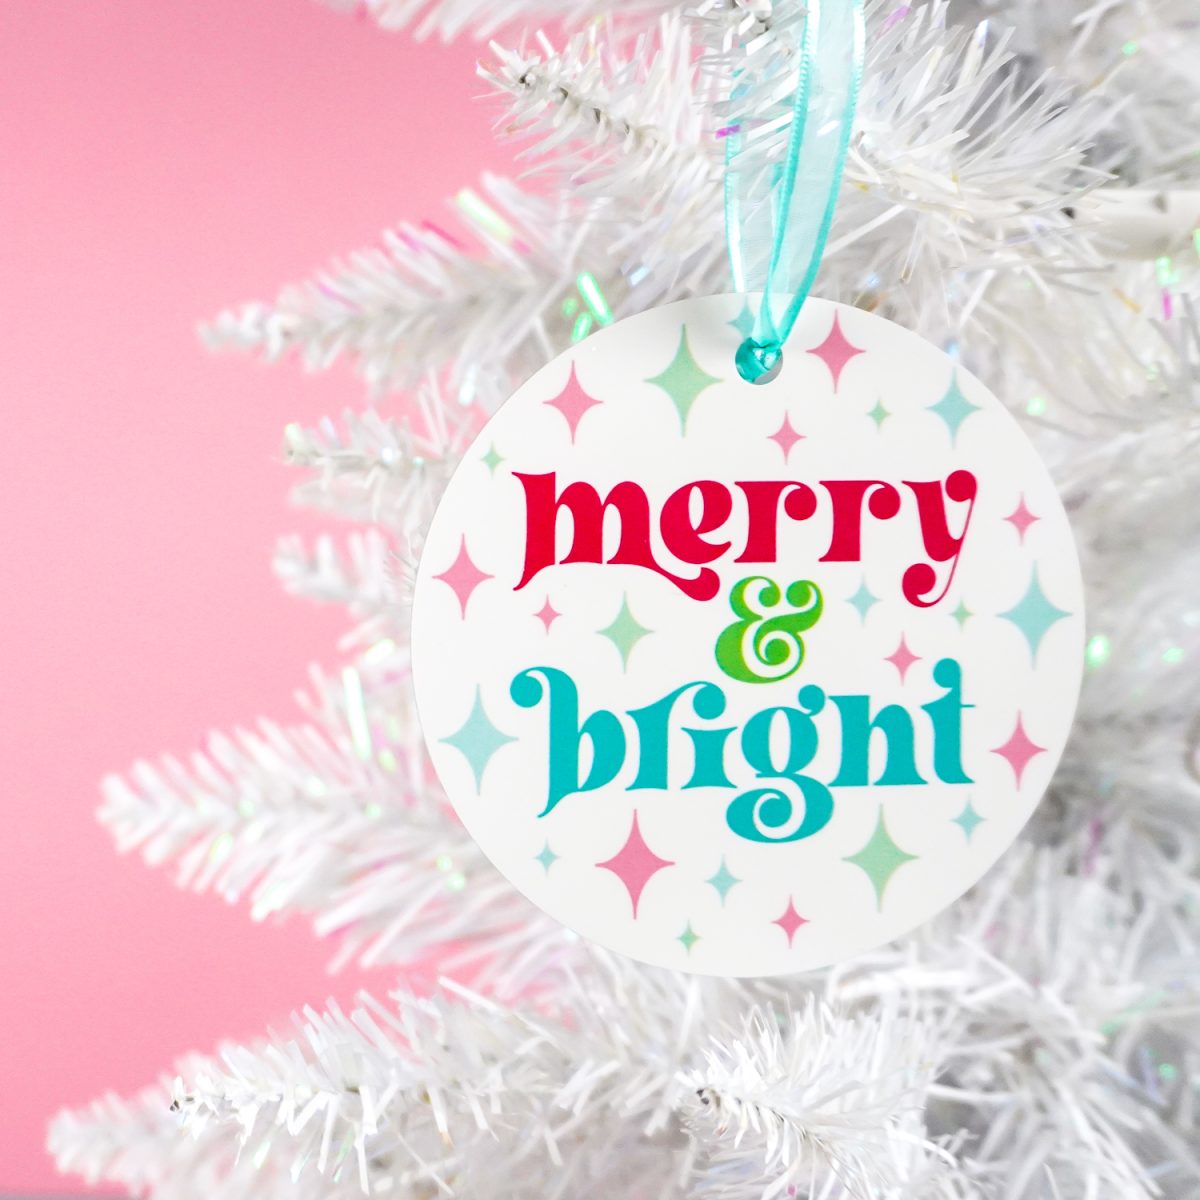 Colorful "merry & bright" ornament on a white Christmas tree with a pink background